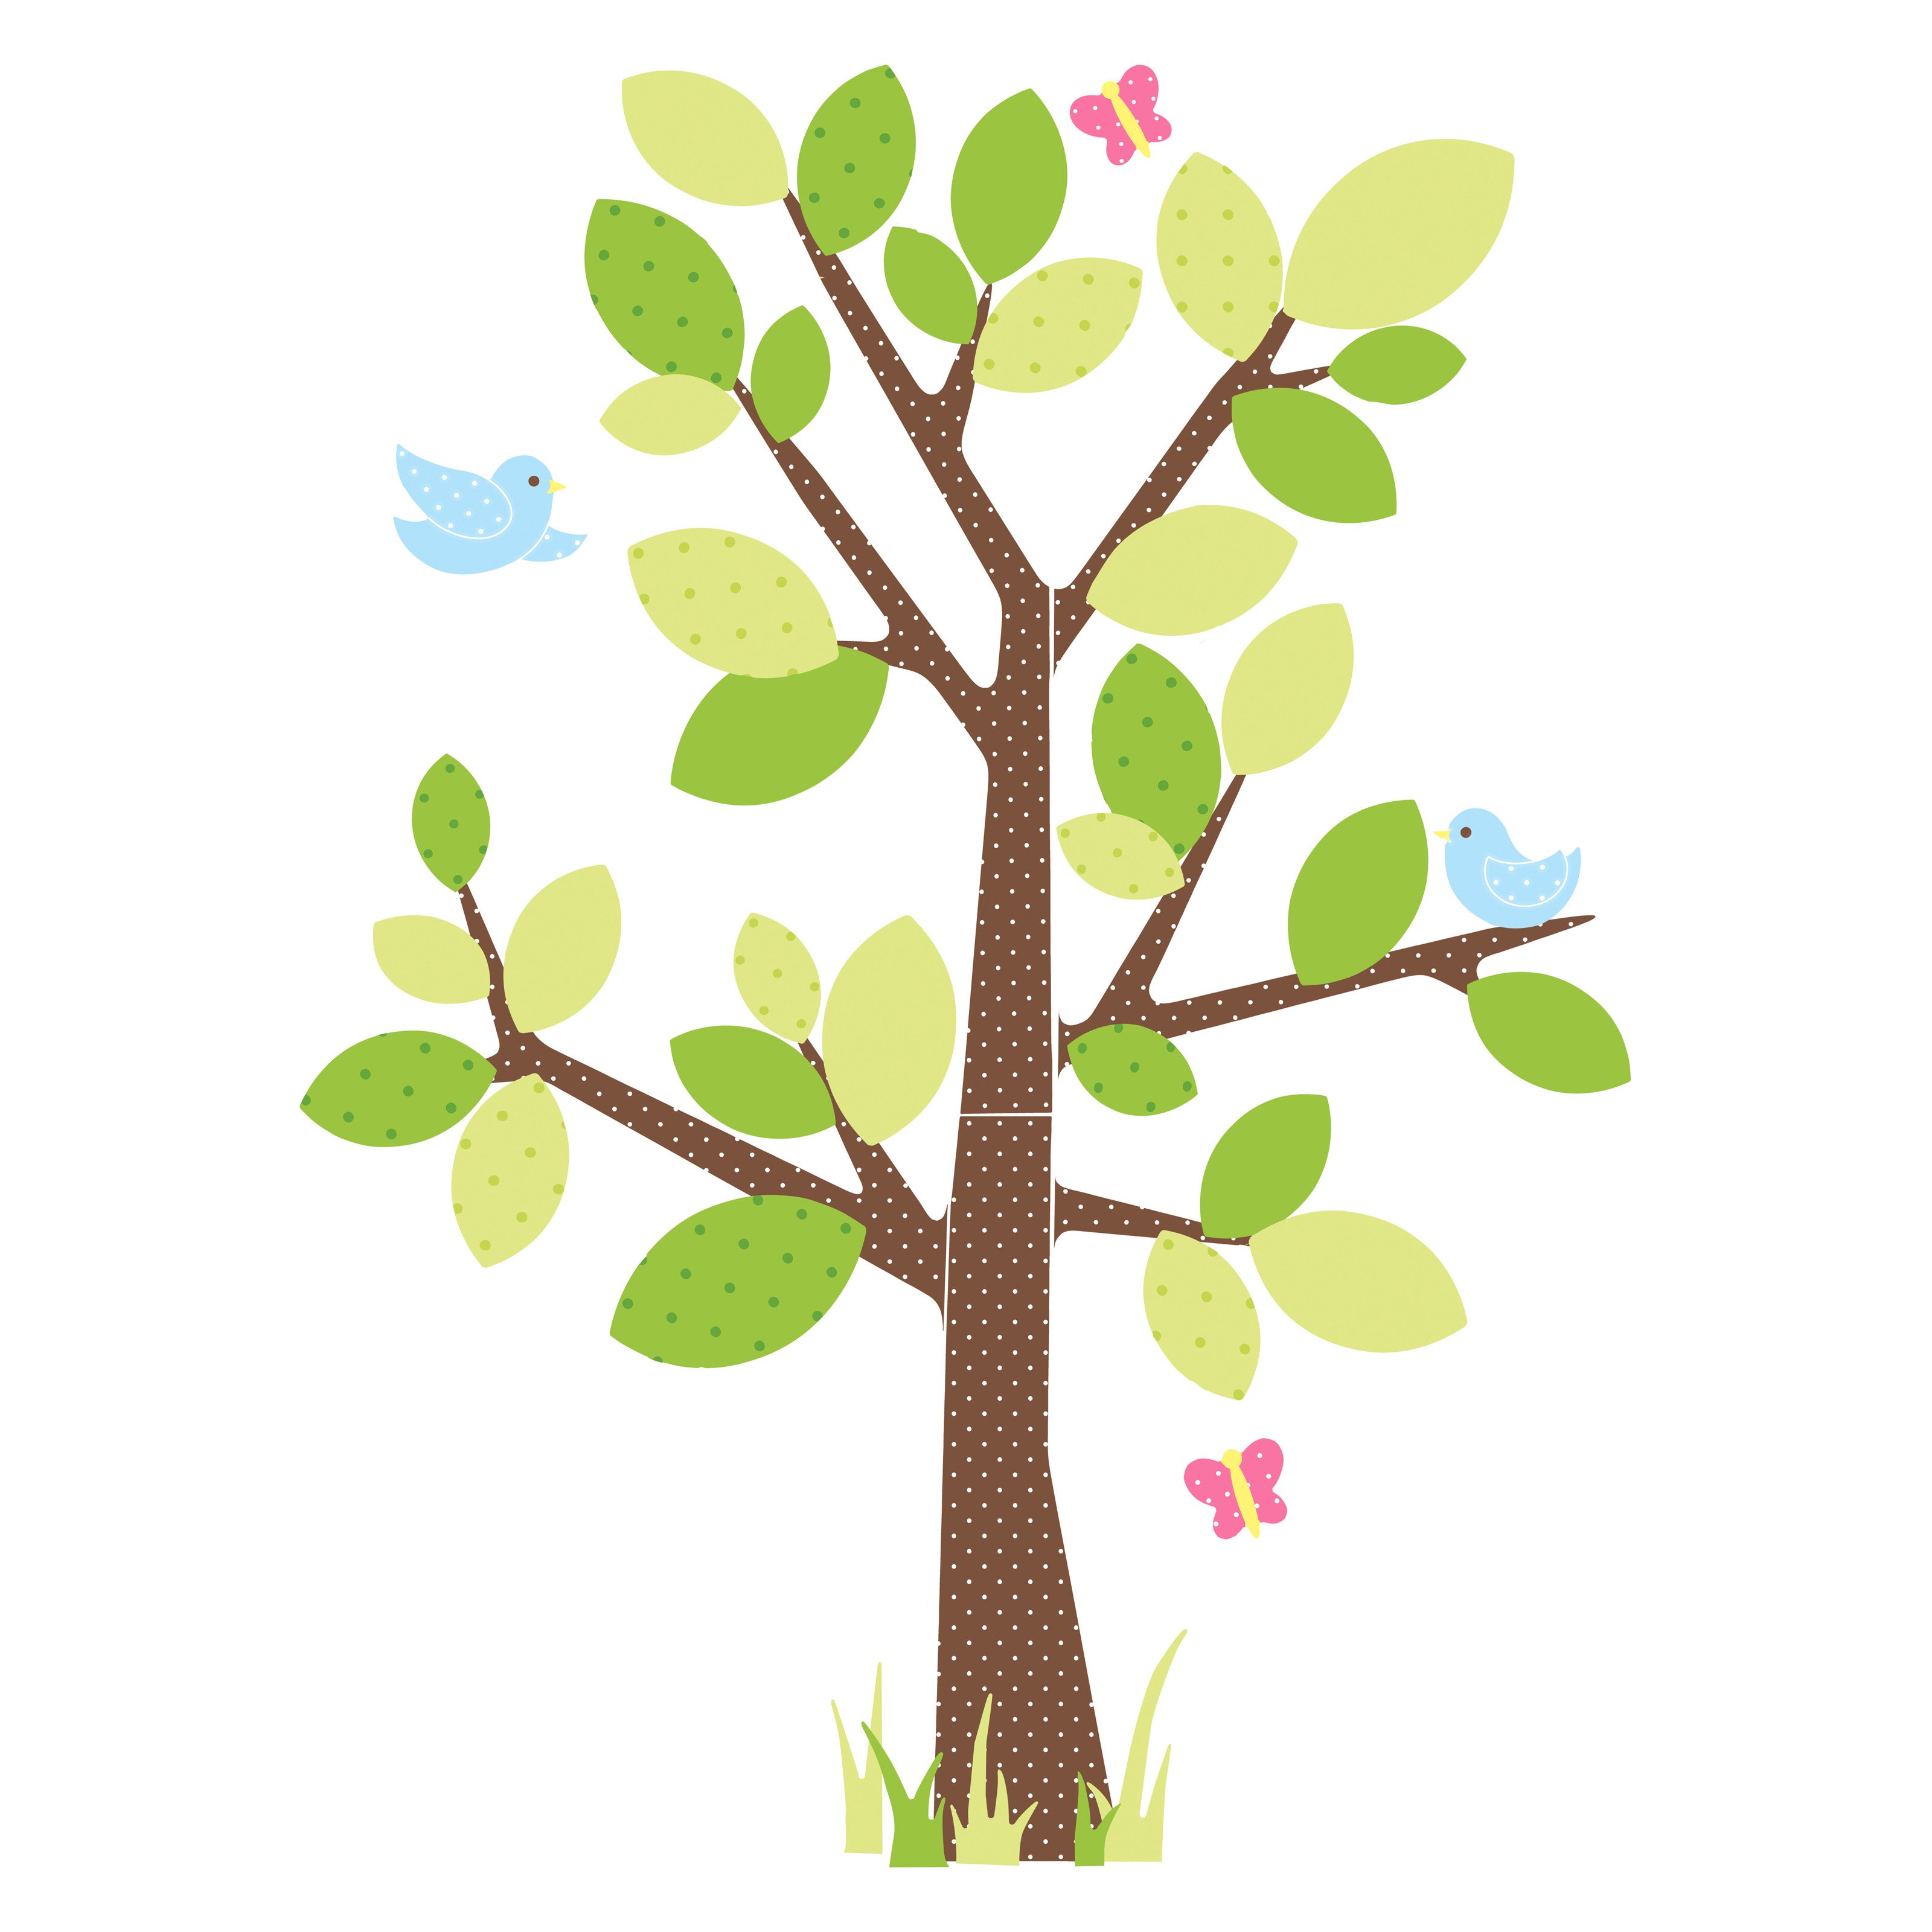 Cartoon Trees With Branches | Free Download Clip Art | Free Clip ...